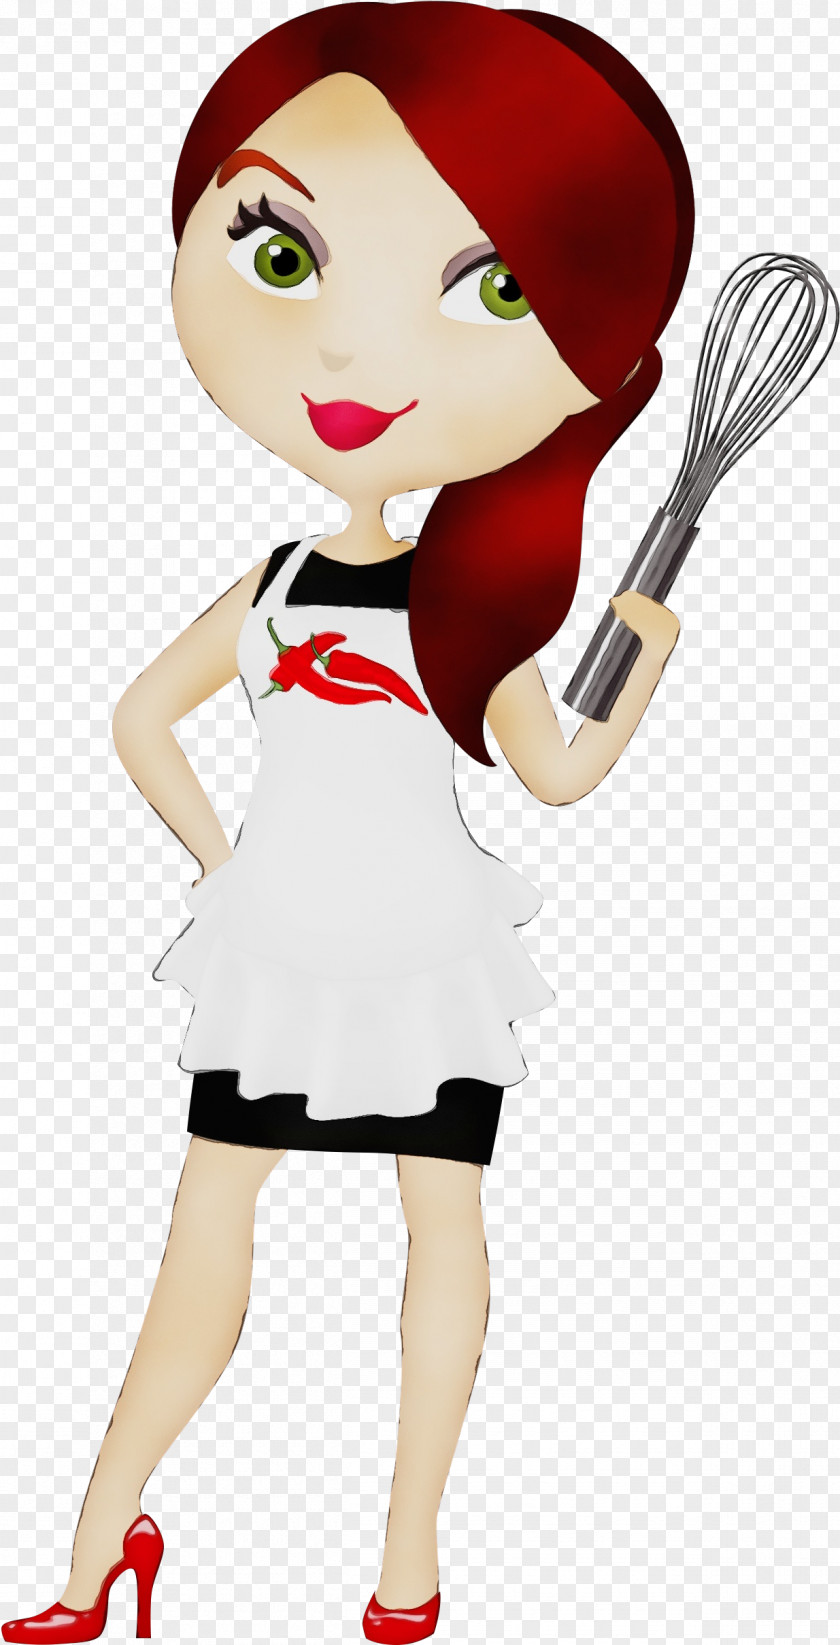 Style Charwoman Chef Cartoon Cooking Transparency Food PNG